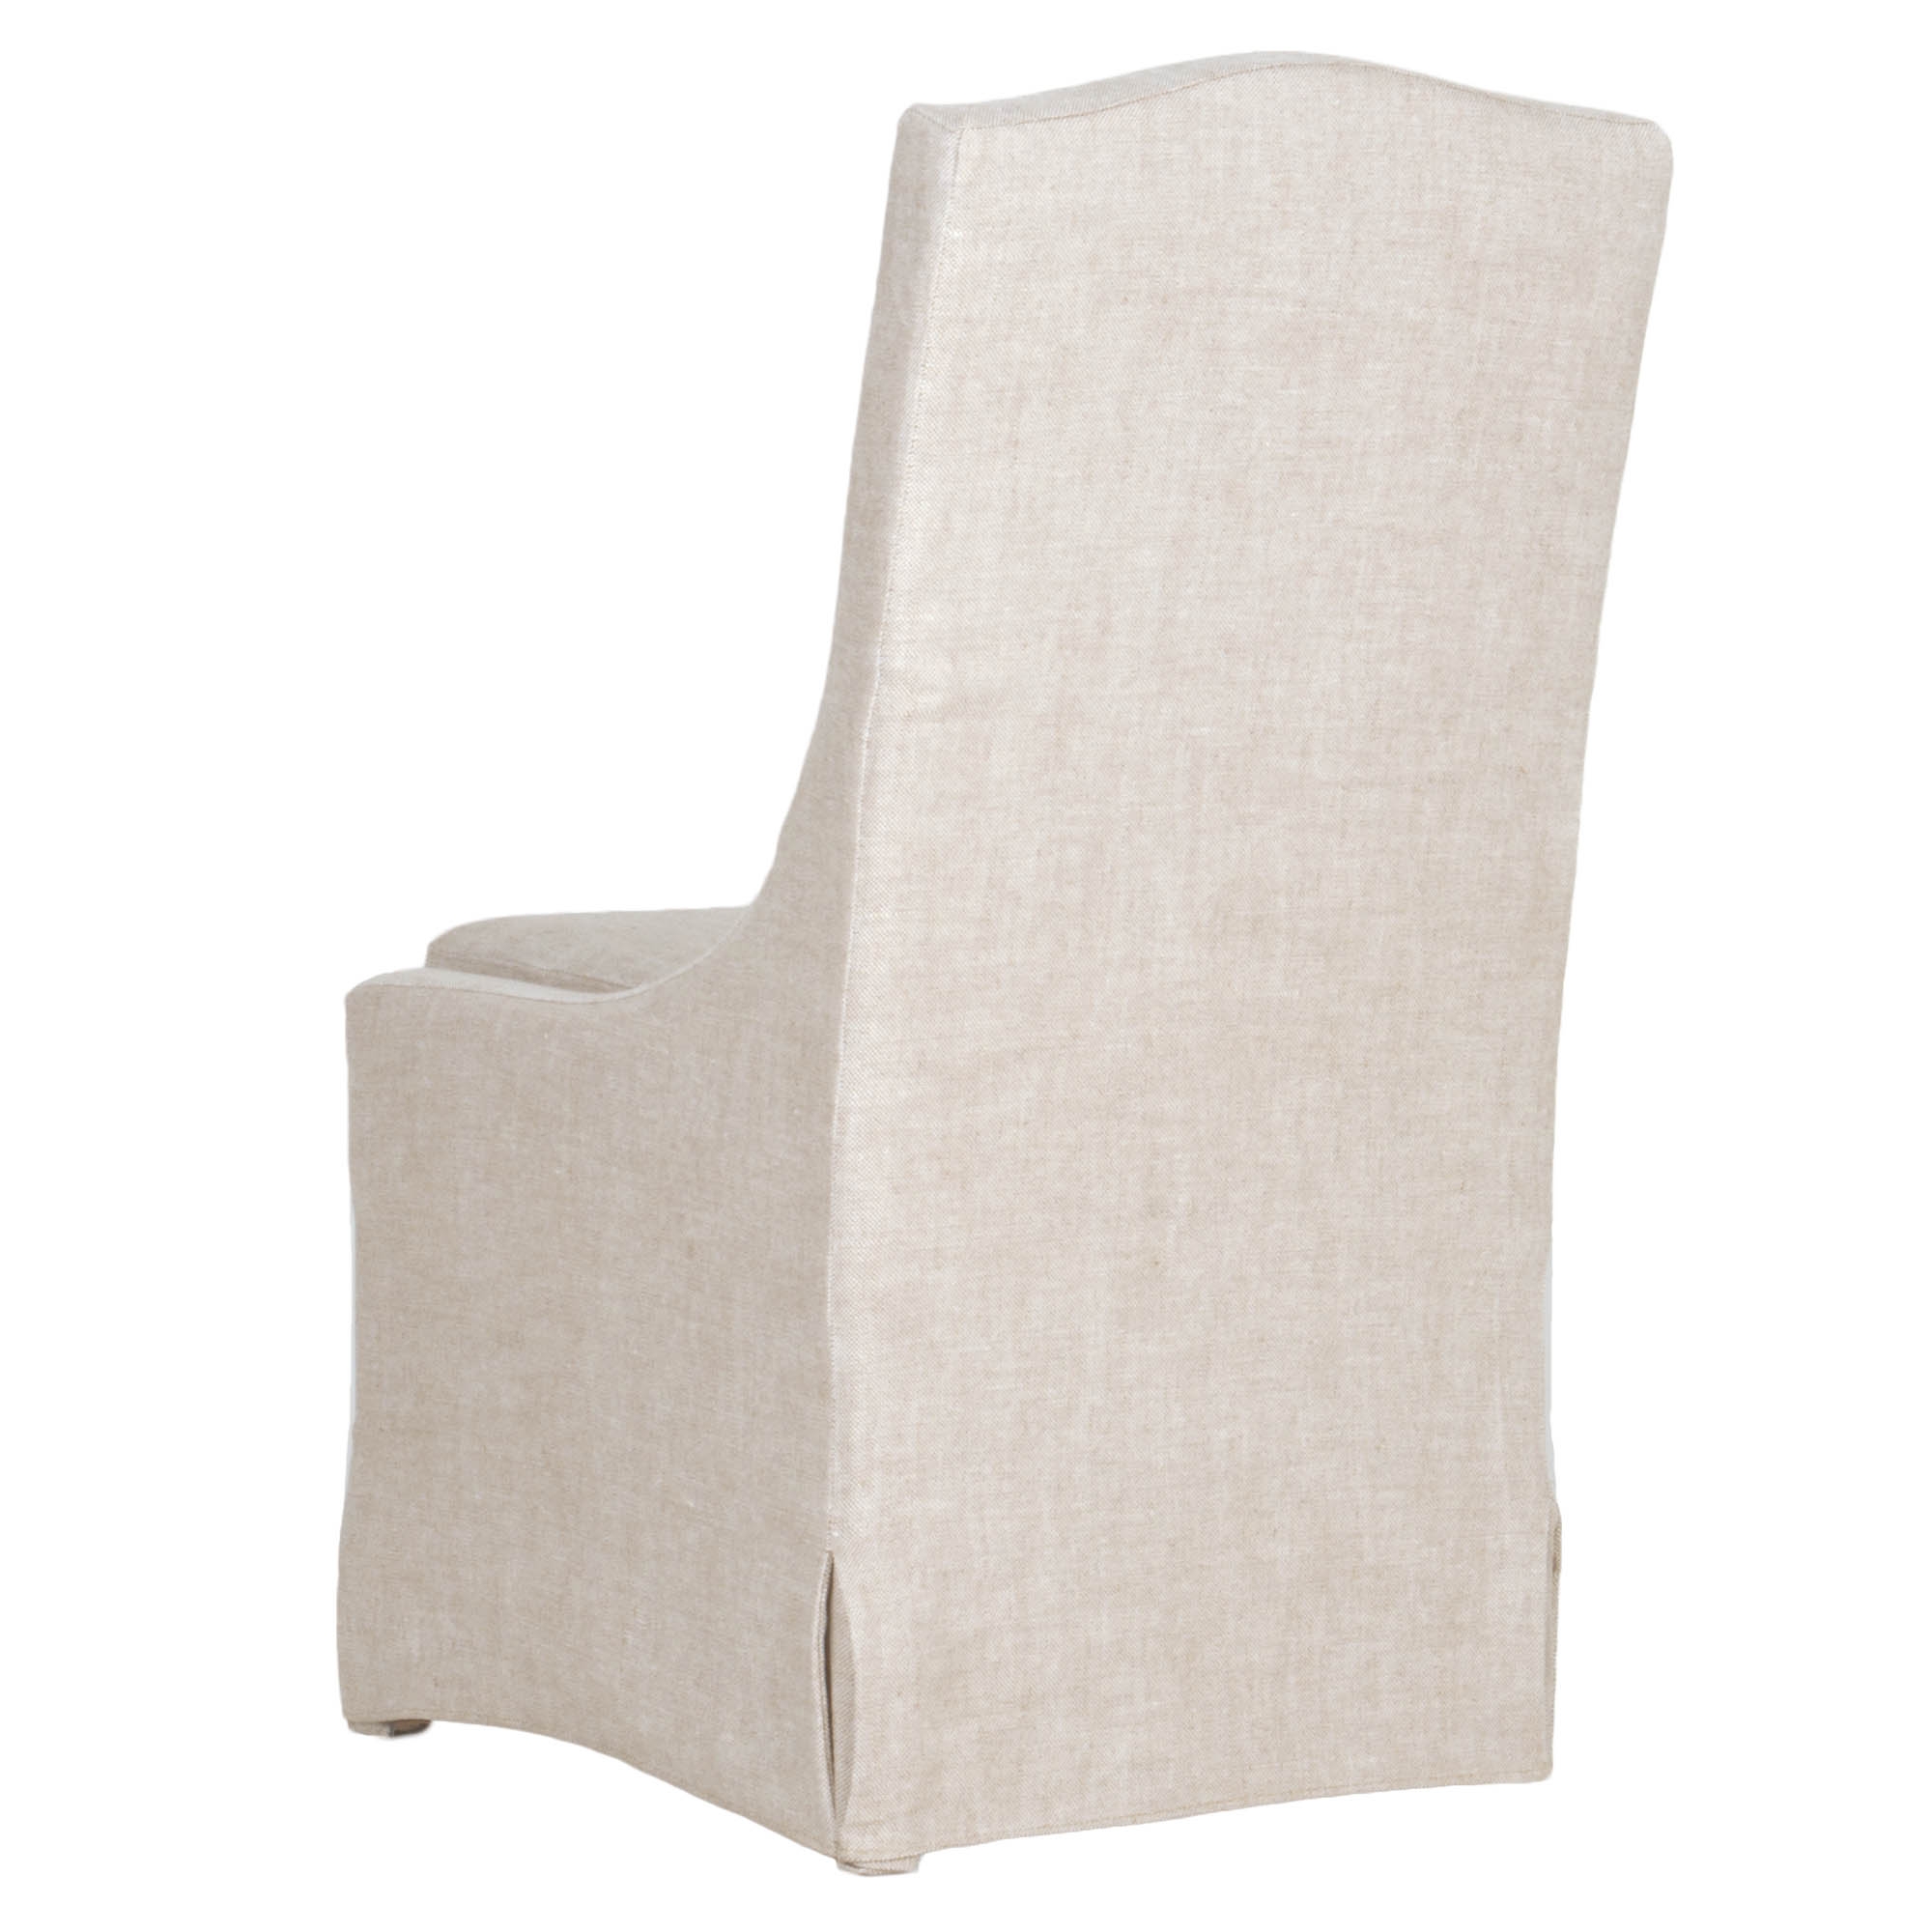 Colette Slipcover Dining Chair, Set of 2 - Image 3